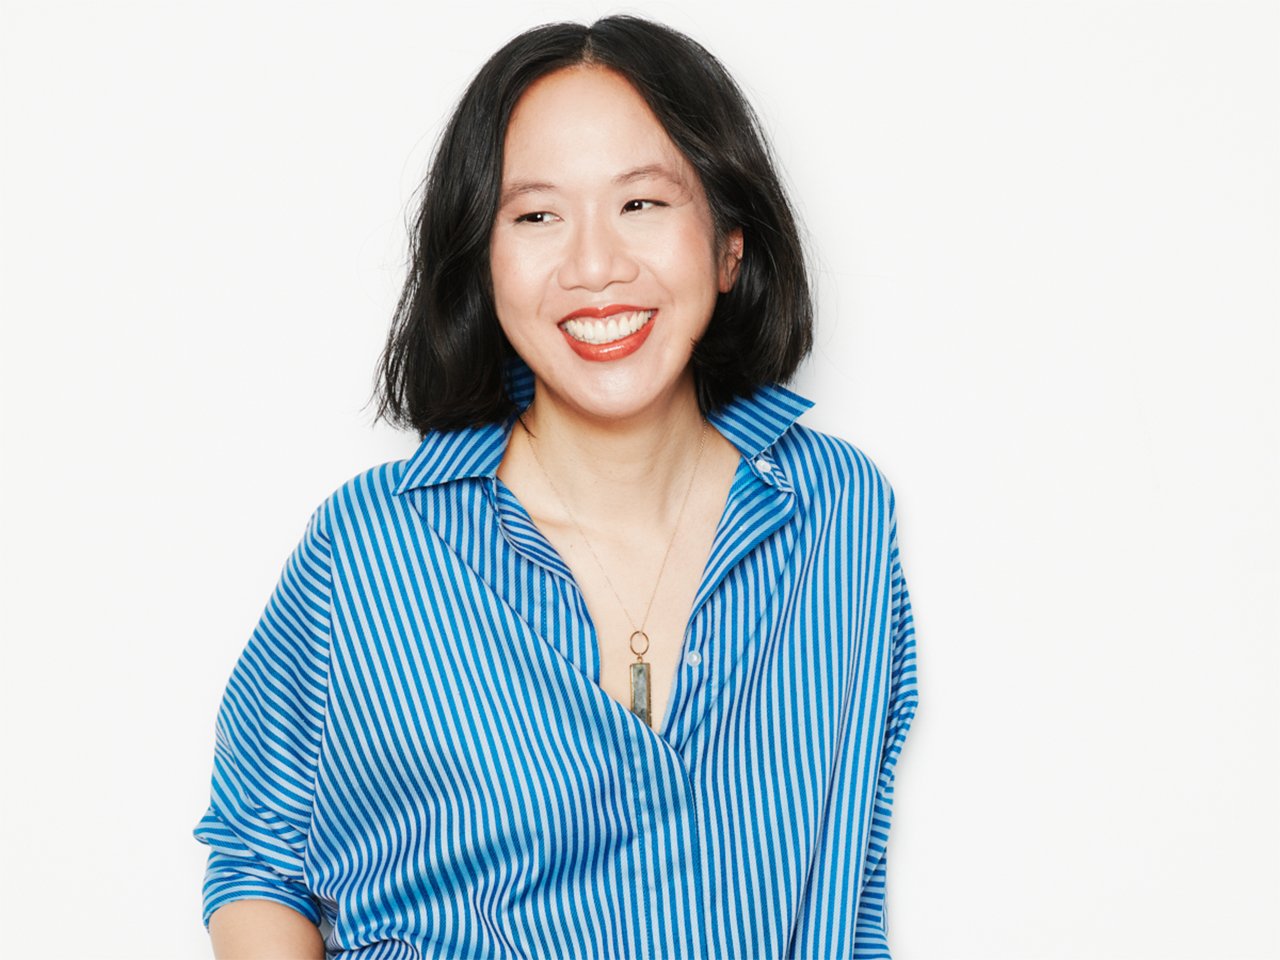 Author Jen Sookfong Lee on a white background, smiling and wearing a blue vertical striped blouse